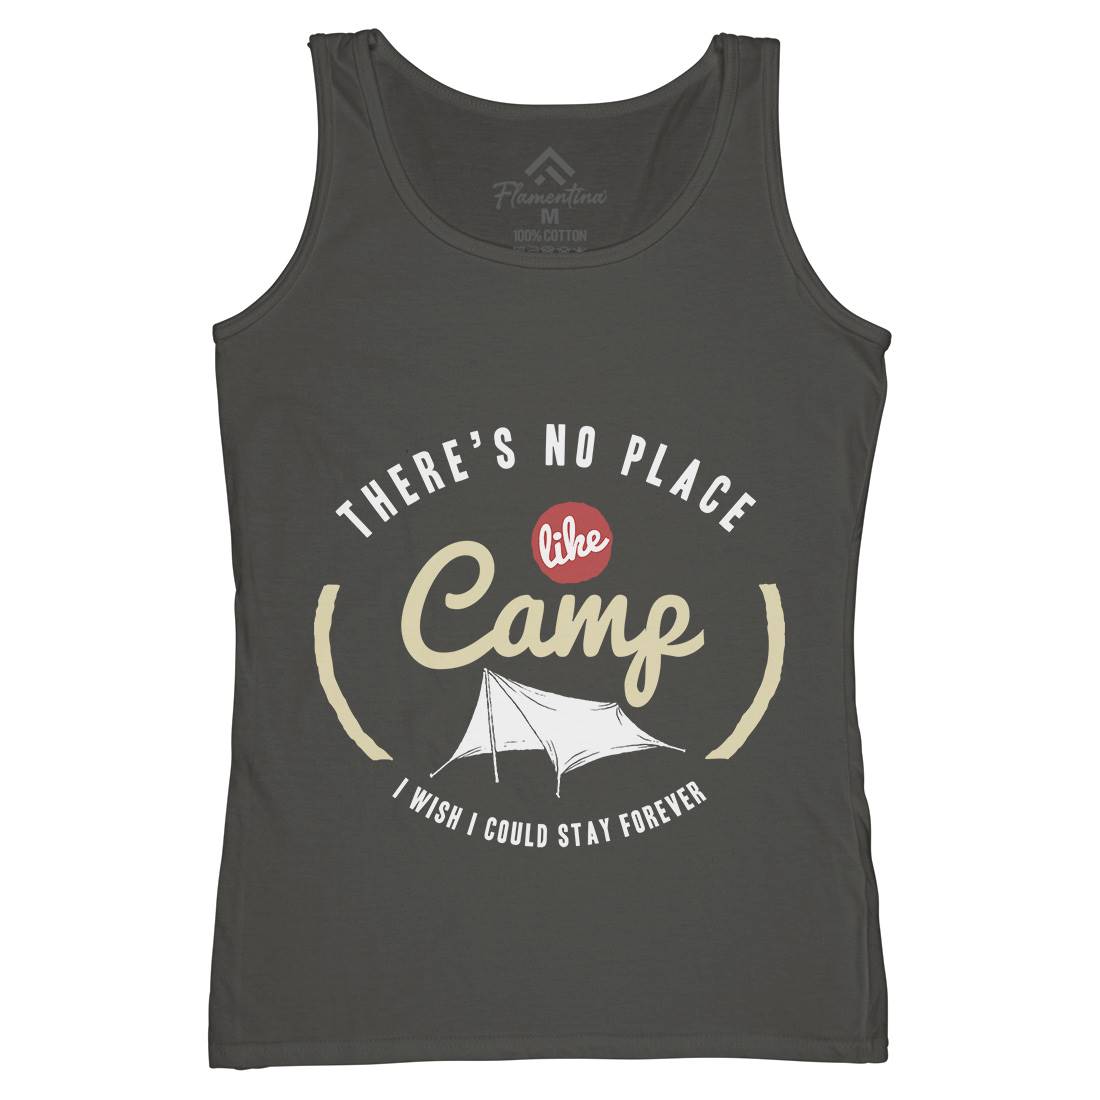 No Place Like Camp Womens Organic Tank Top Vest Nature A353